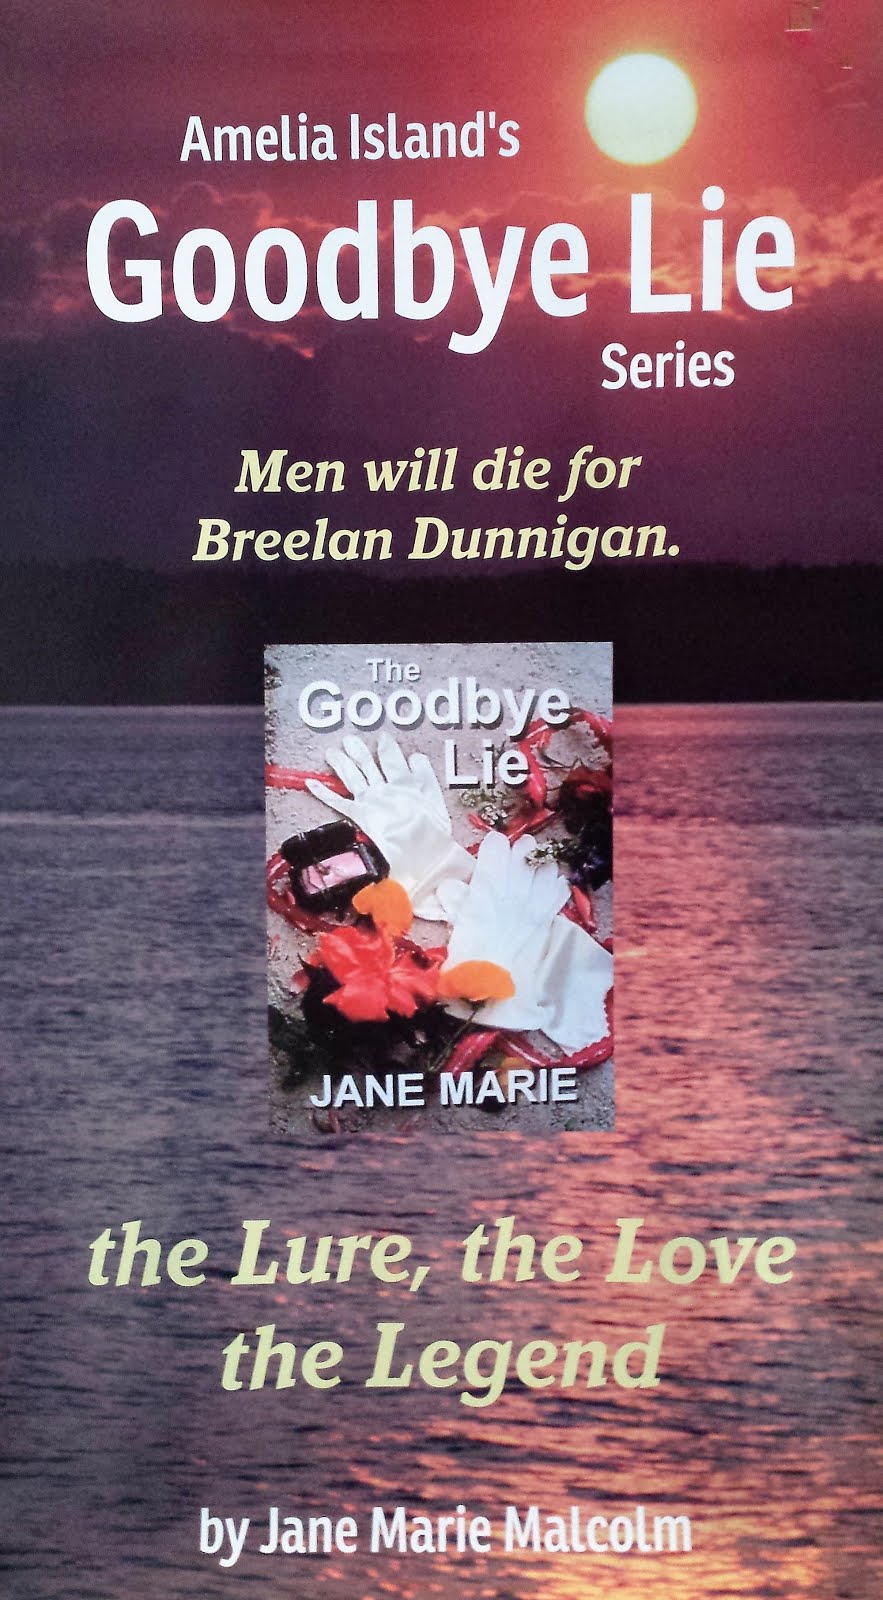 CLICK POSTER BELOW TO ORDER Amelia Island's GOODBYE LIE SERIES in Ebooks and Paperbacks